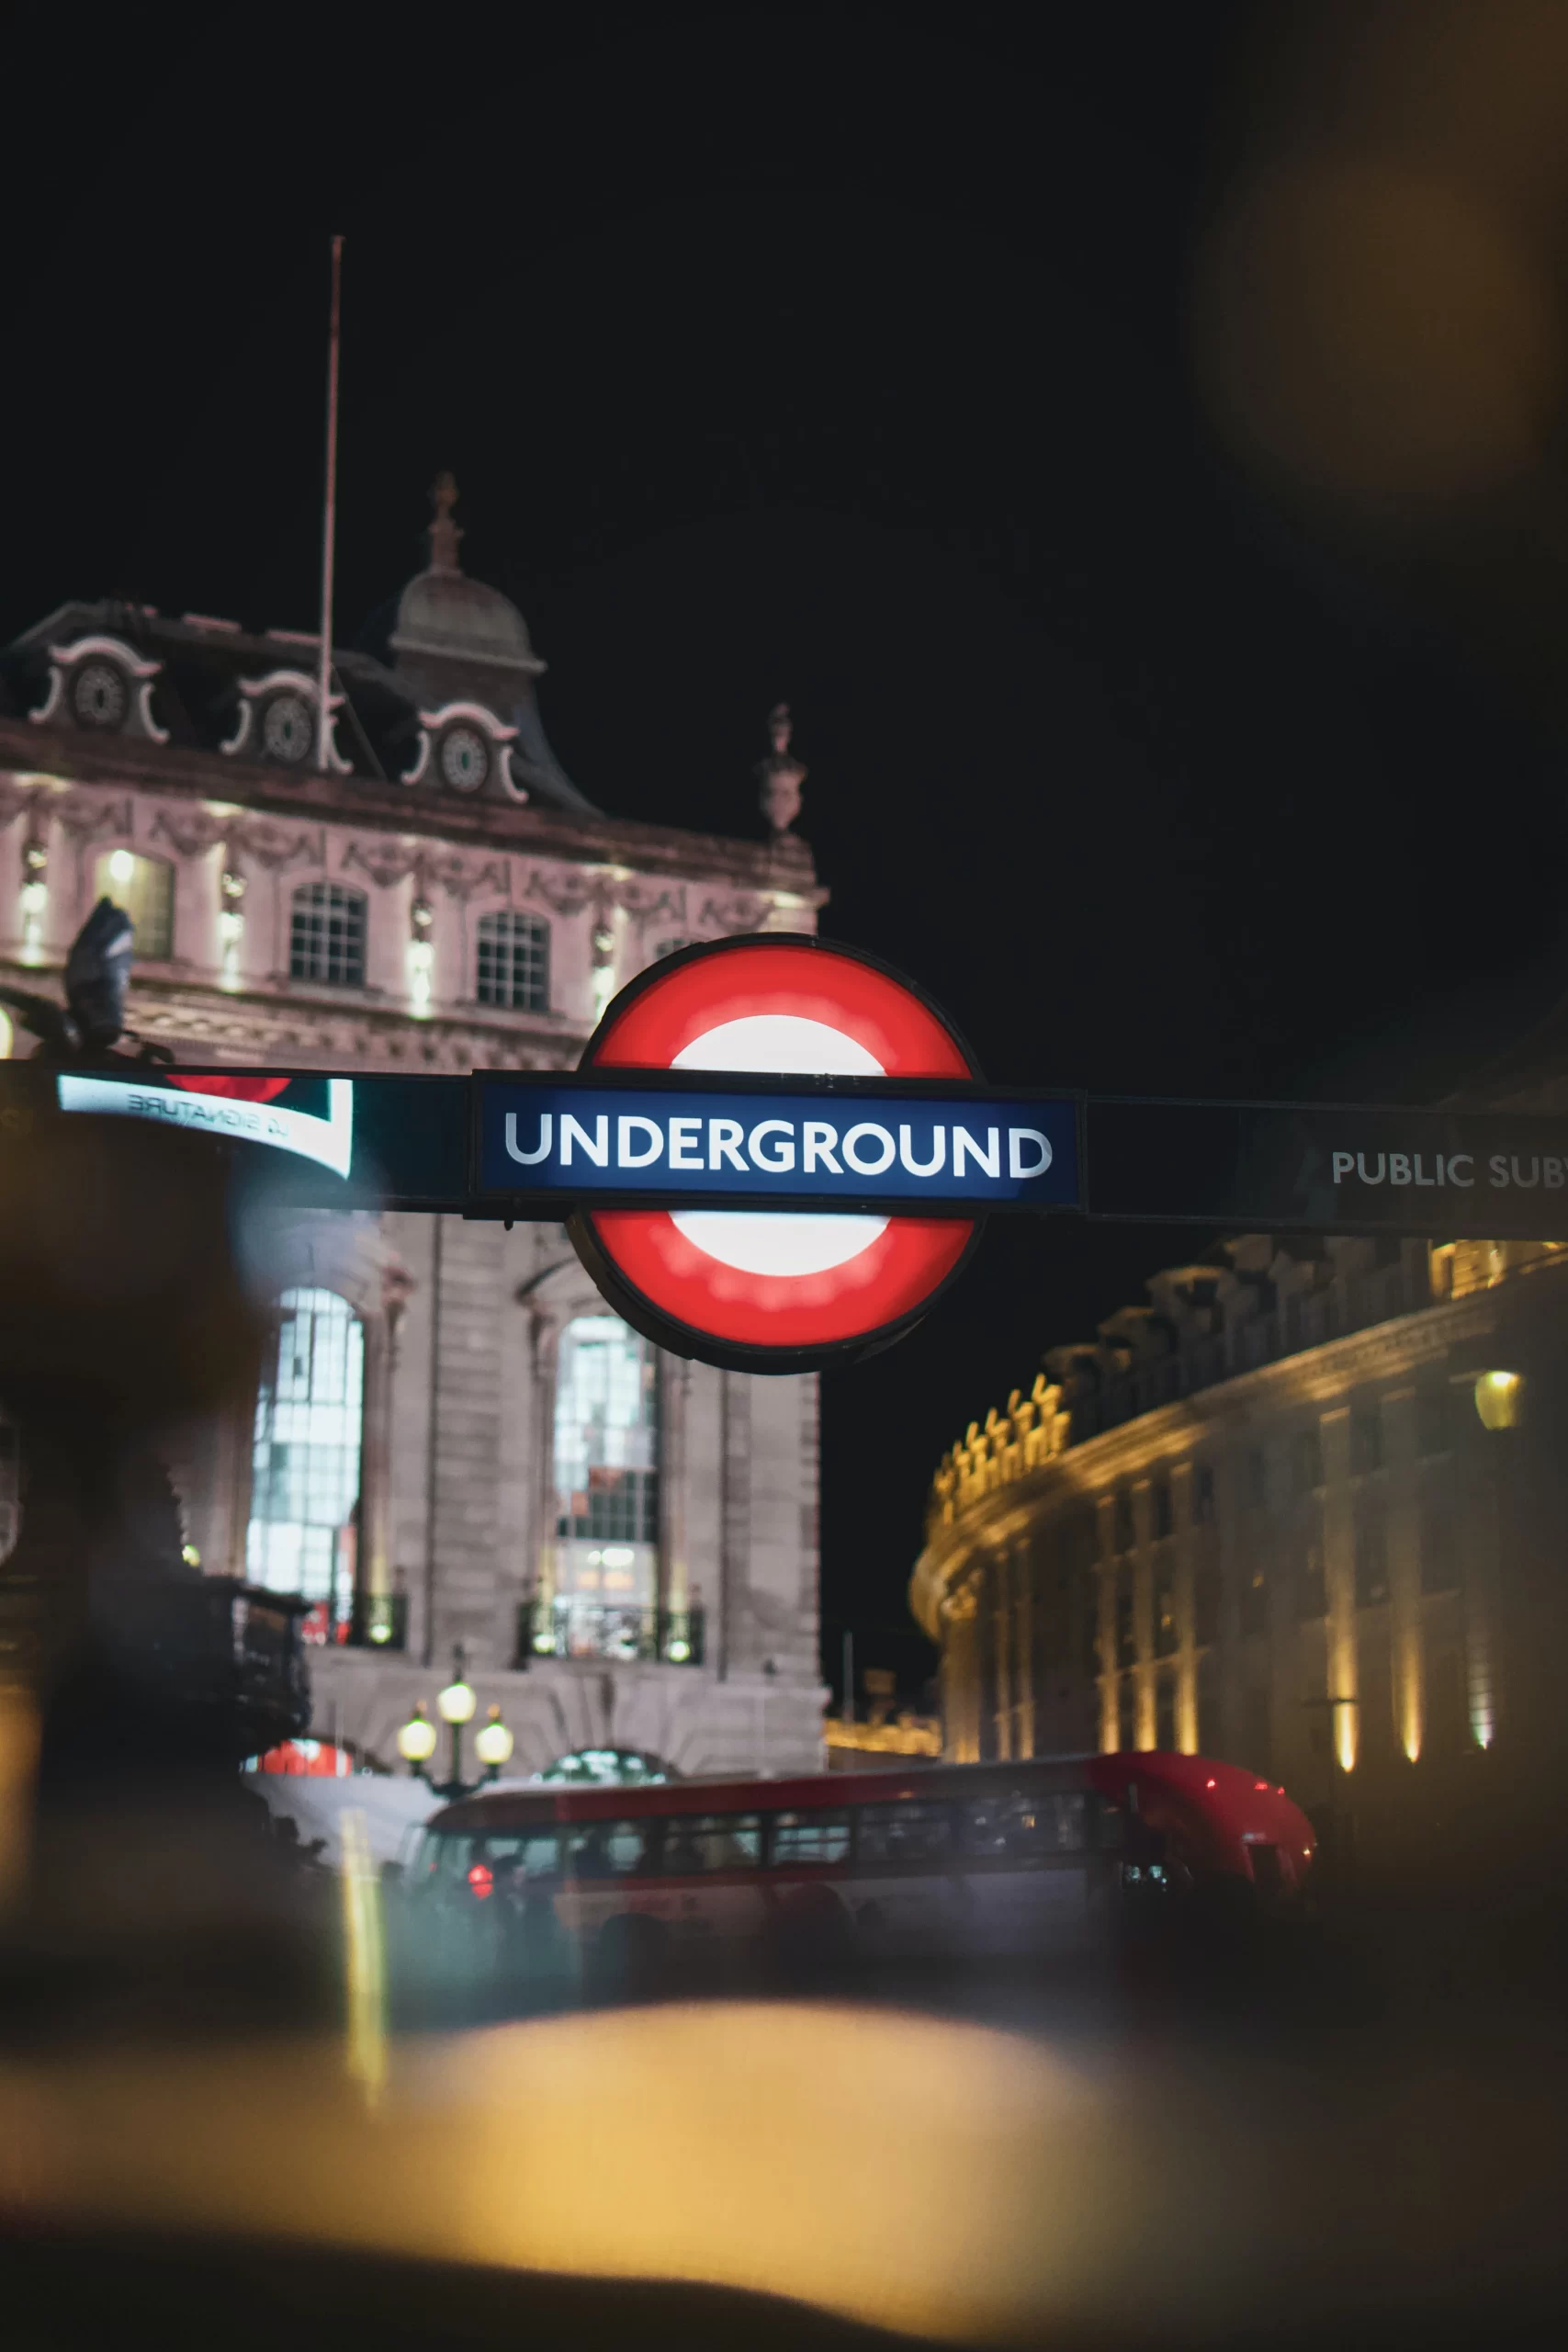 Piccadilly Circus, London, UK<br />
Published on March 4, 2020<br />
Sony, a6000<br />
Free to use under the Unsplash License<br />
Underground sign to metro subway at night in London